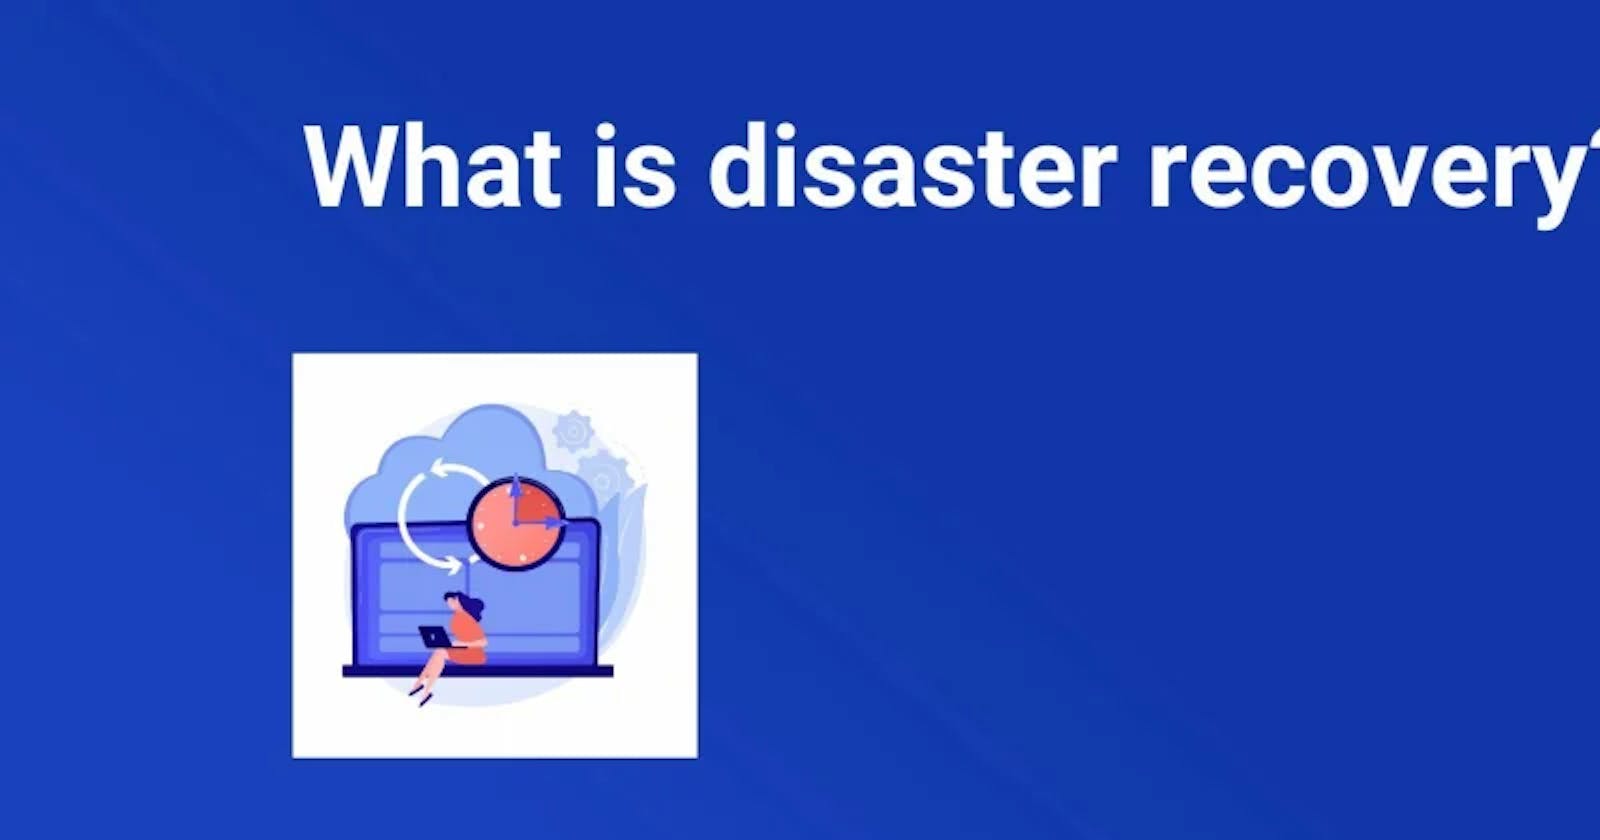 What is disaster recovery?